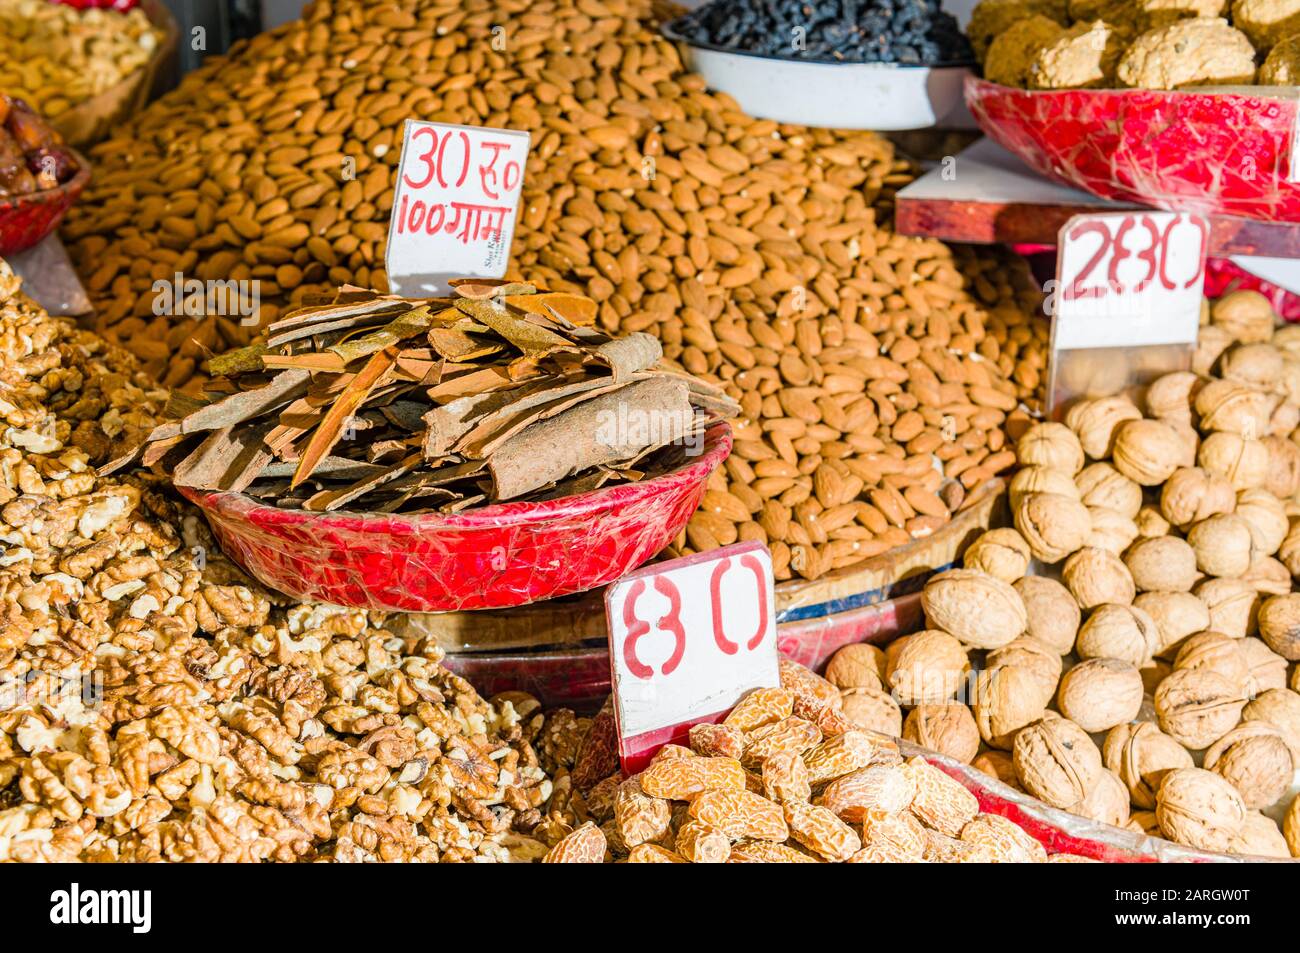 Nuts and many different spices are for sale in the spice market in Old Delhi Stock Photo